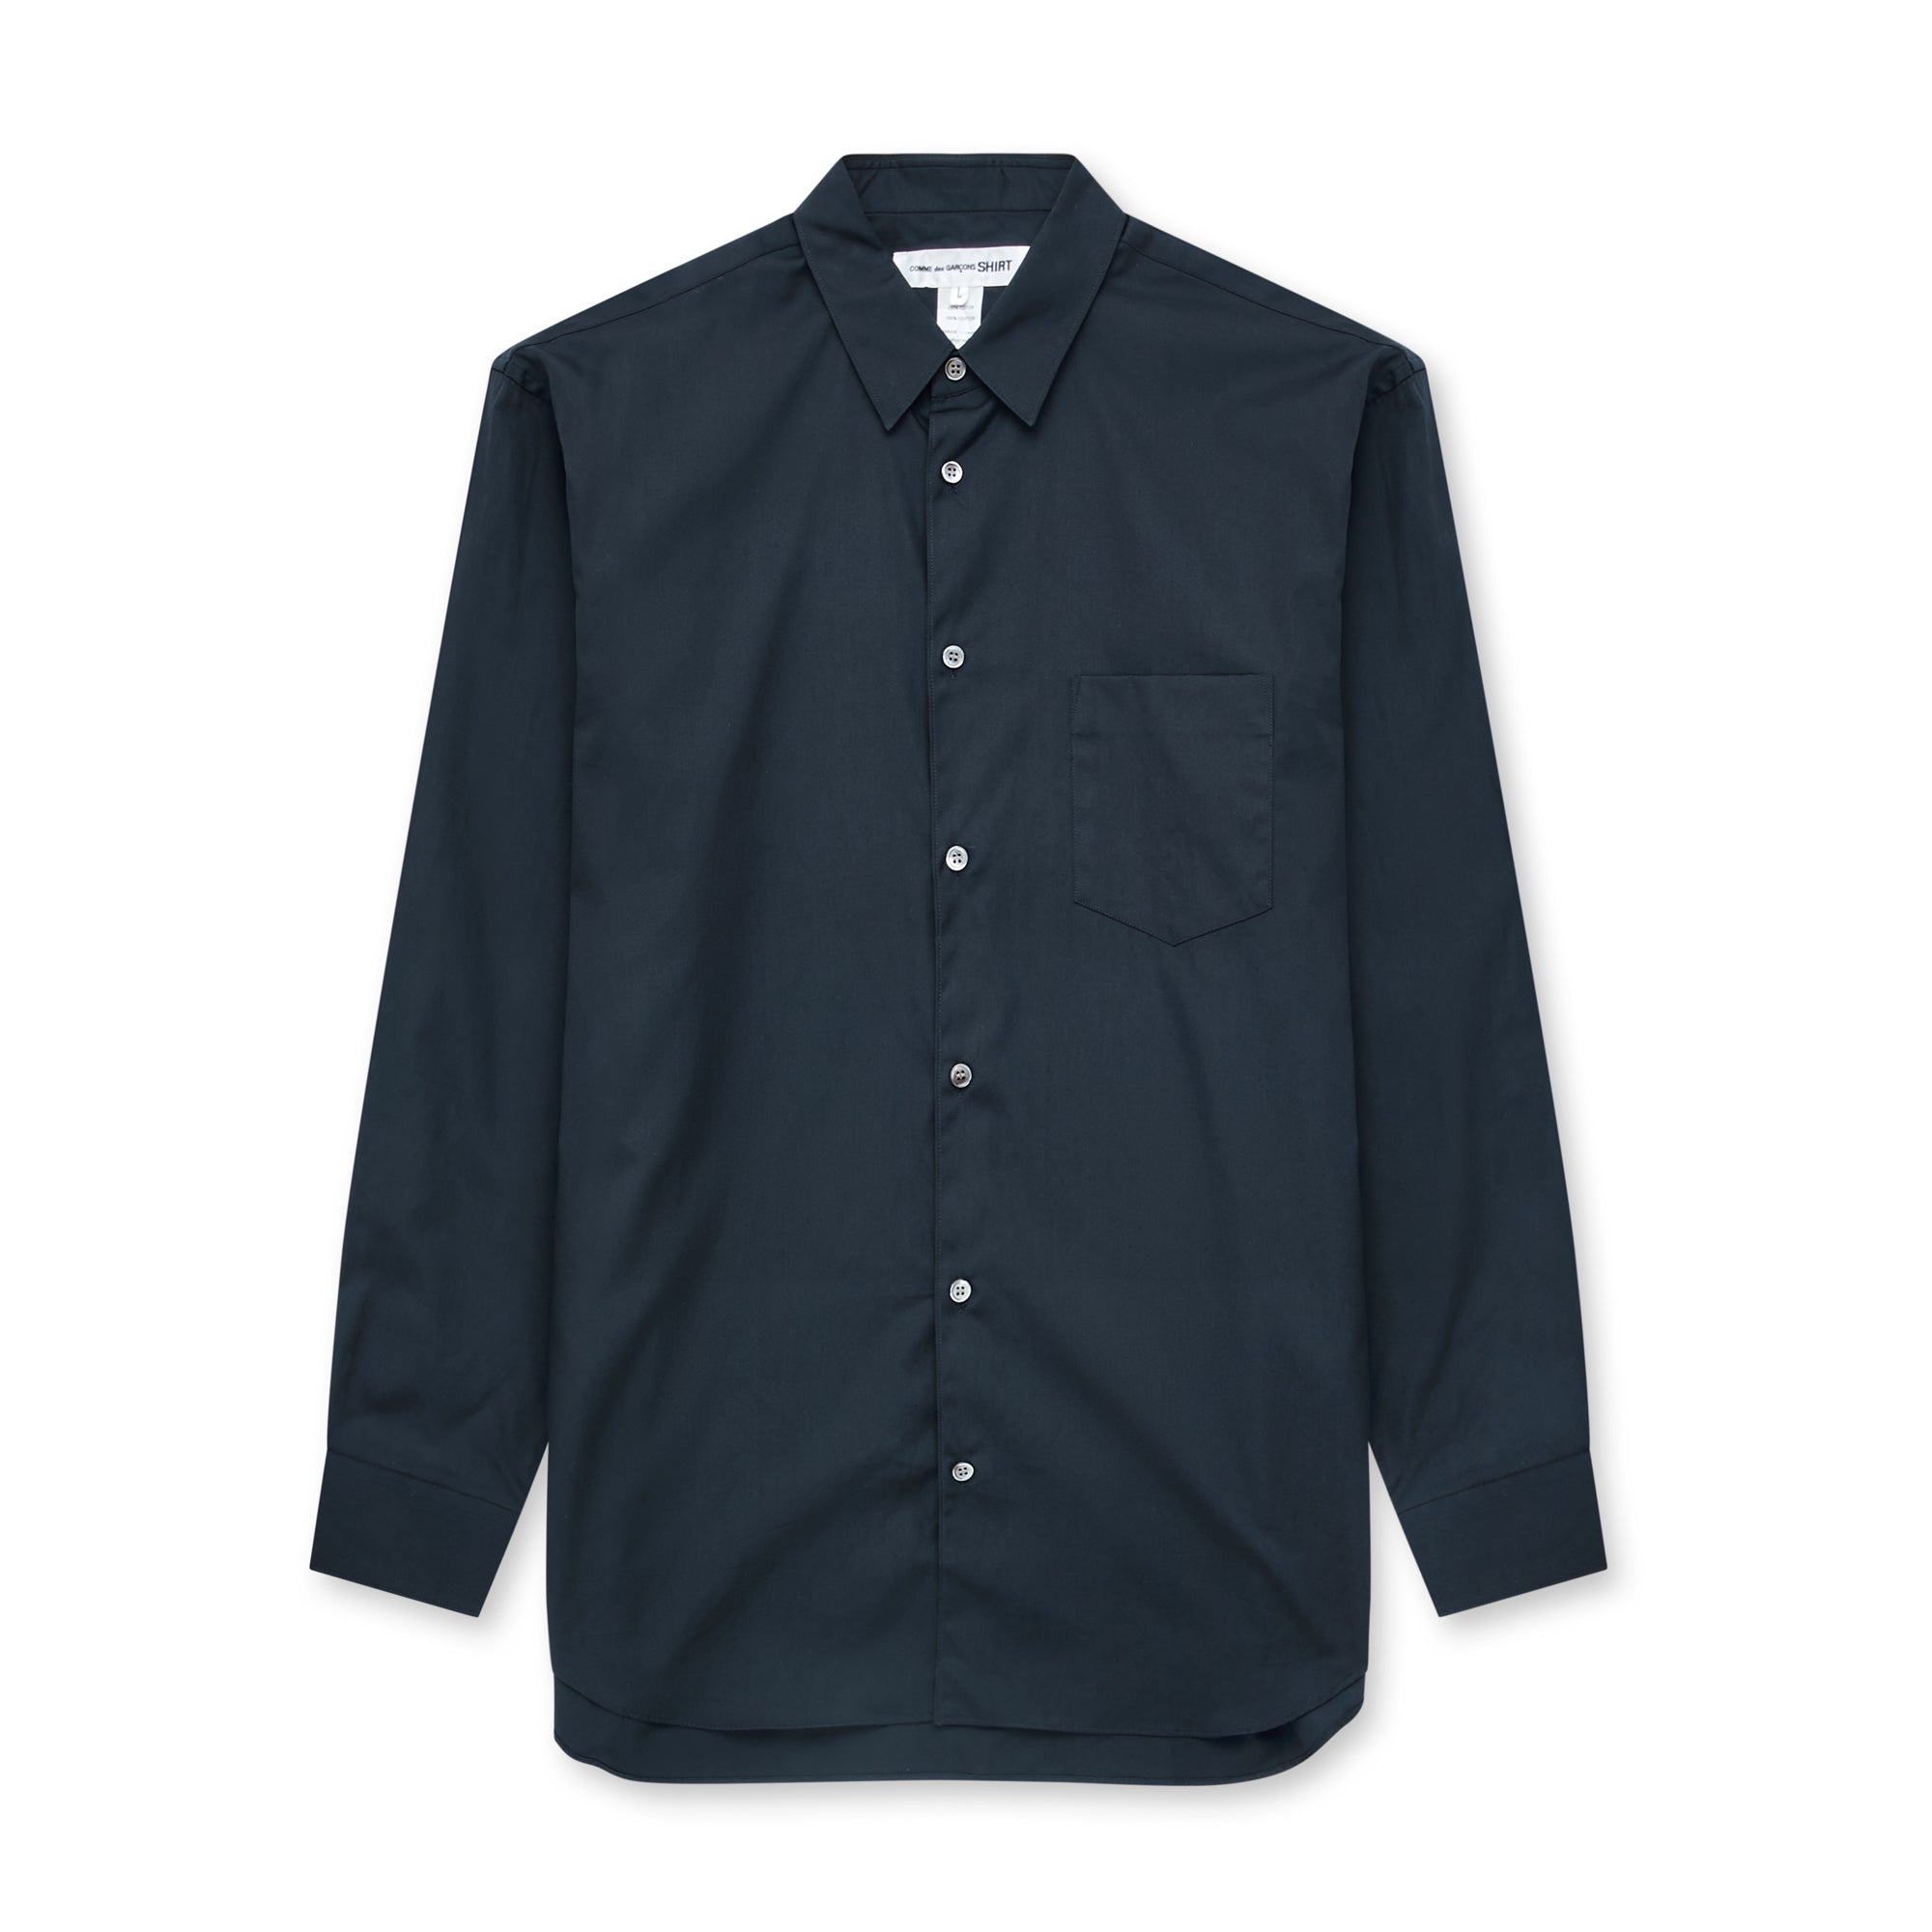 CDG Shirt Forever - Classic Fit Woven Cotton Shirt - (Navy) view 1